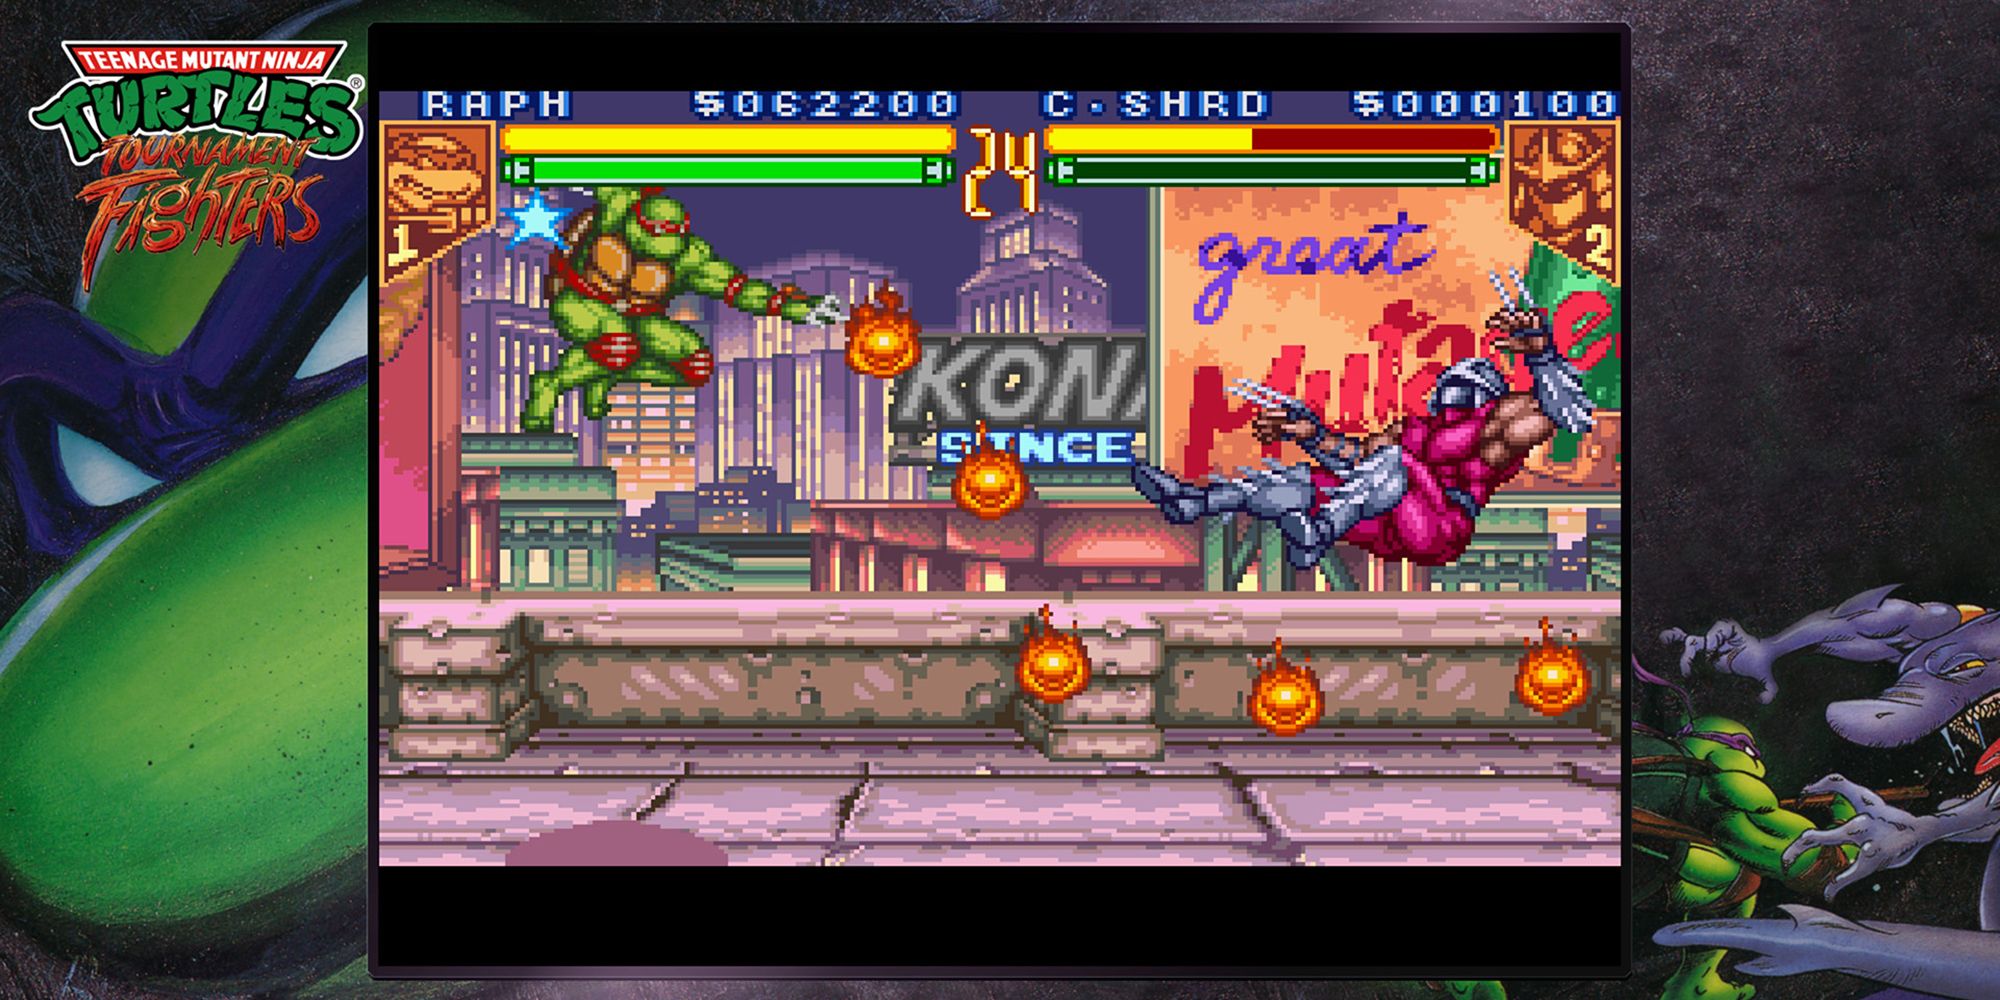 Cowabunga Collection Tournament Fighters